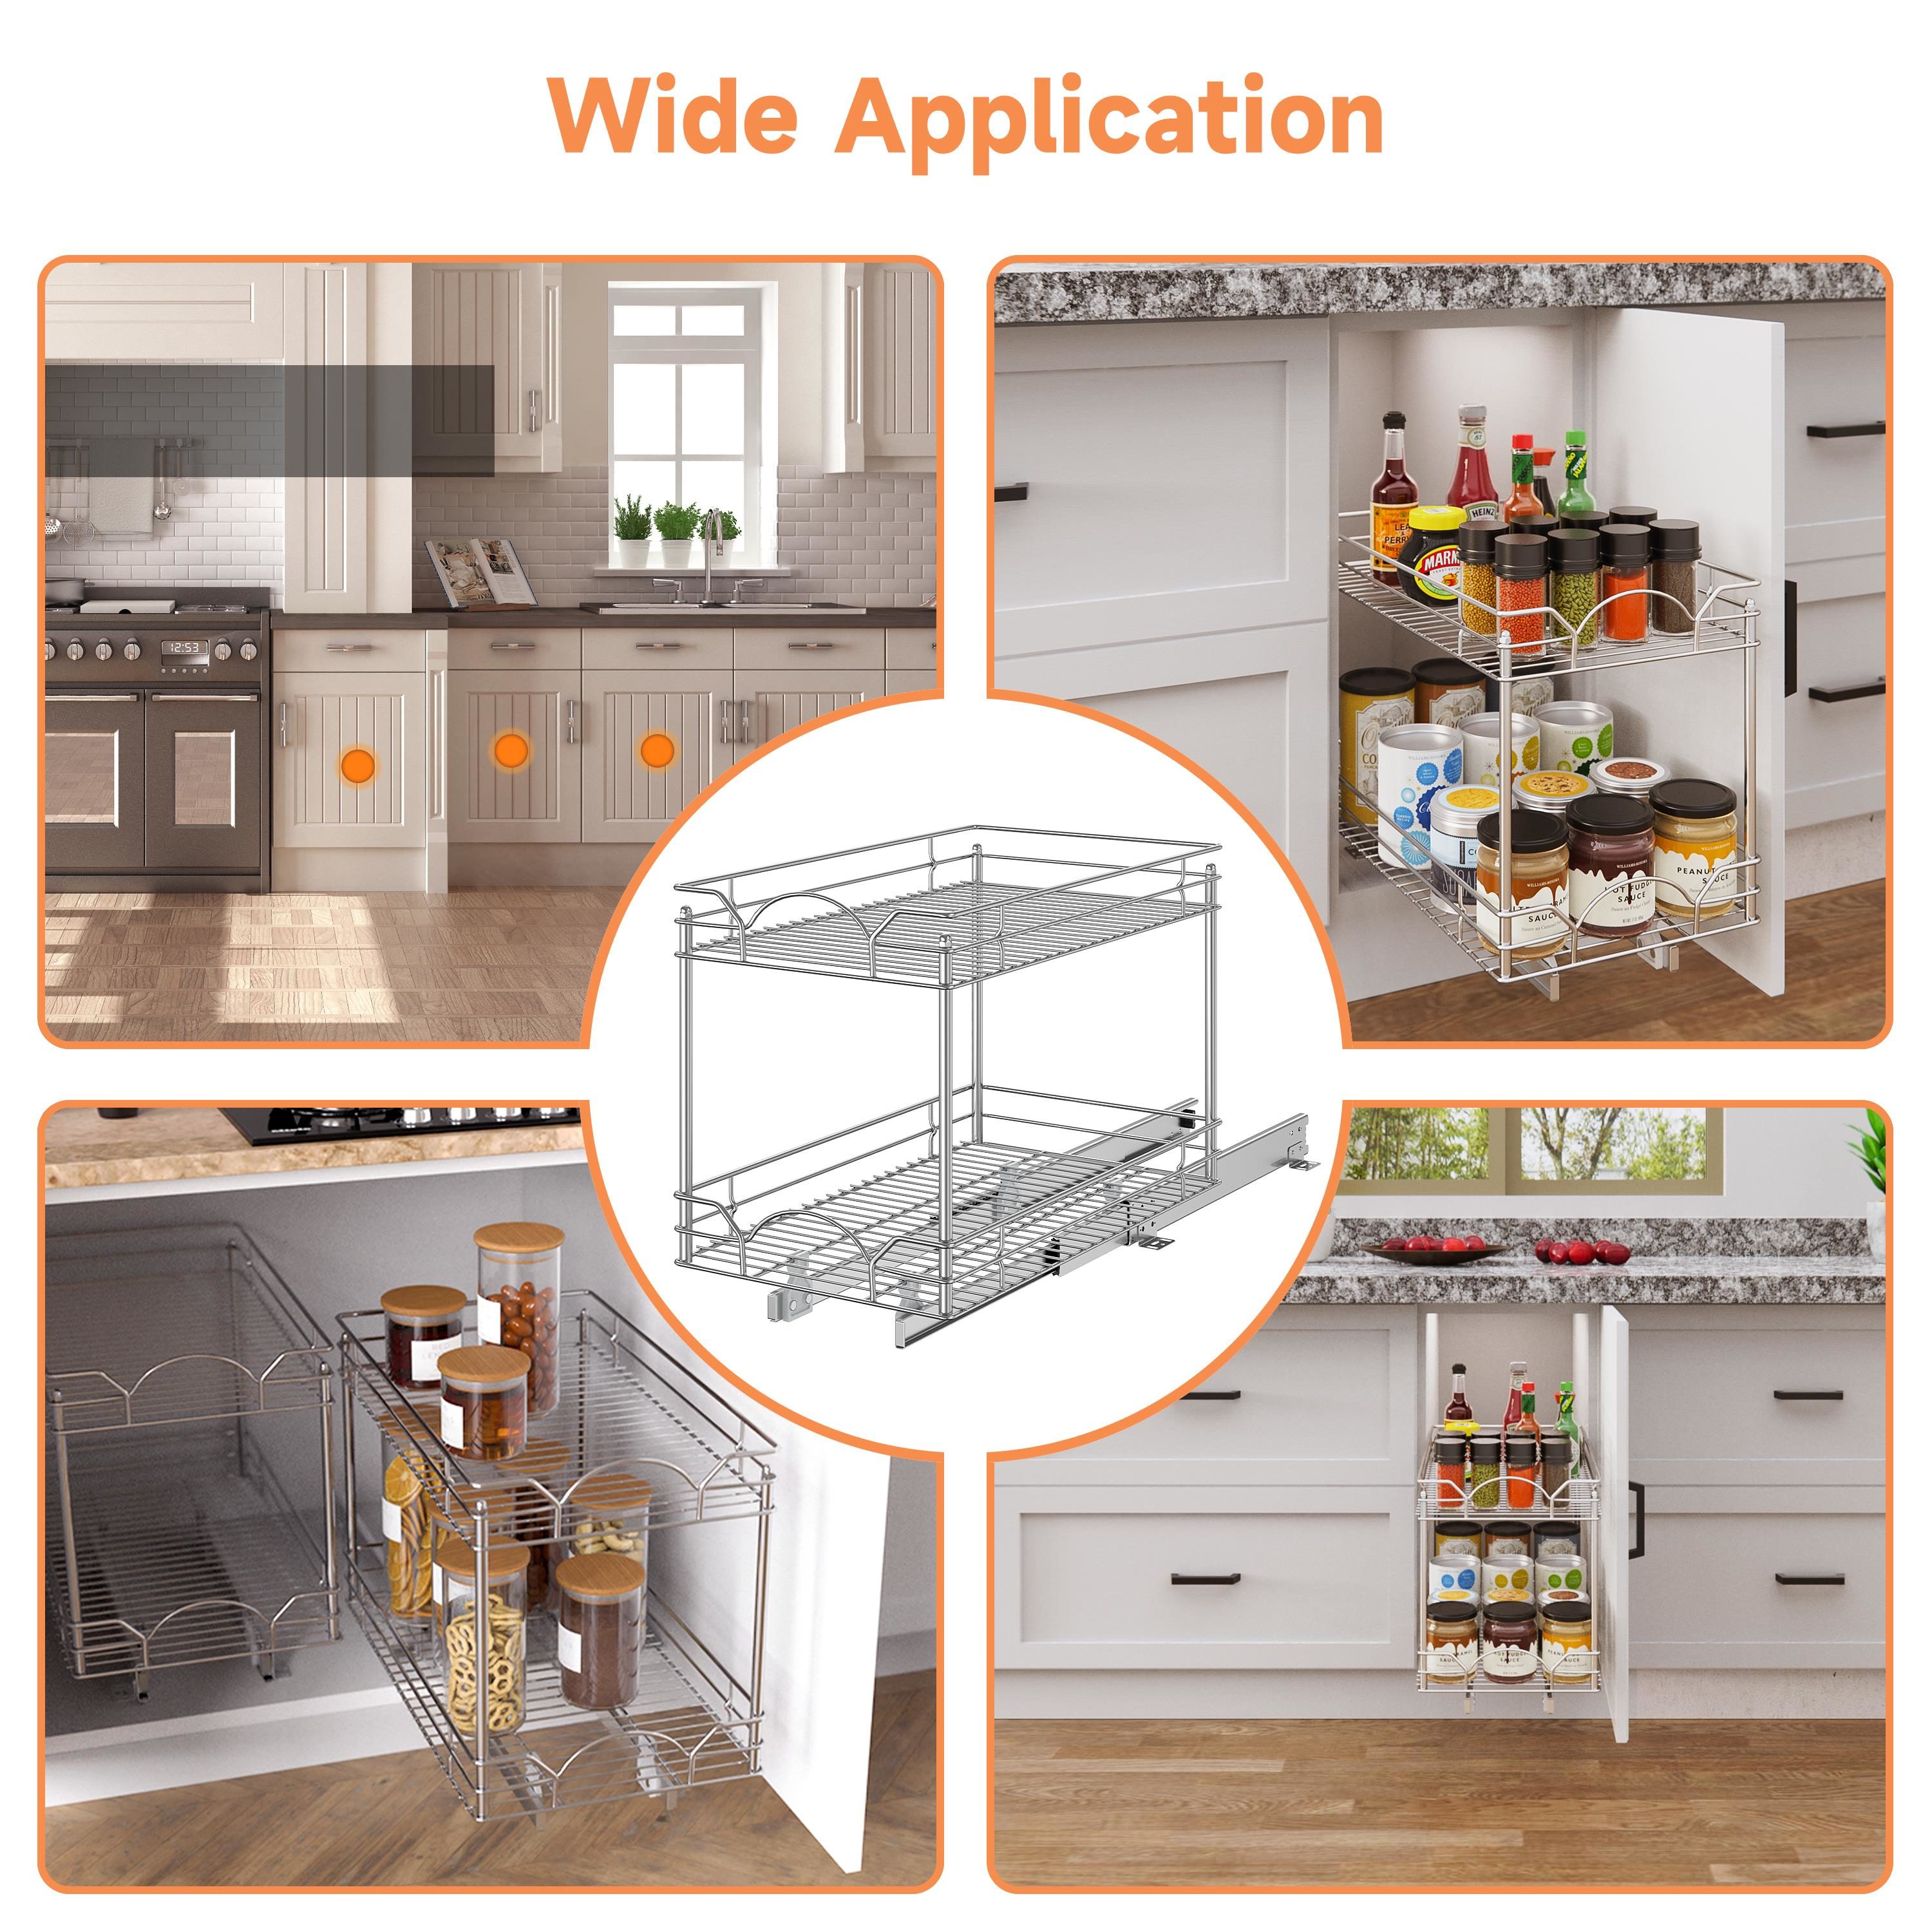 HOMLUX 10 in. H x 5 in. W x 10 in. D Metal 2-Tier Pull Out Spice Rack  Organizer for Cabinet HD-11-FDC - The Home Depot